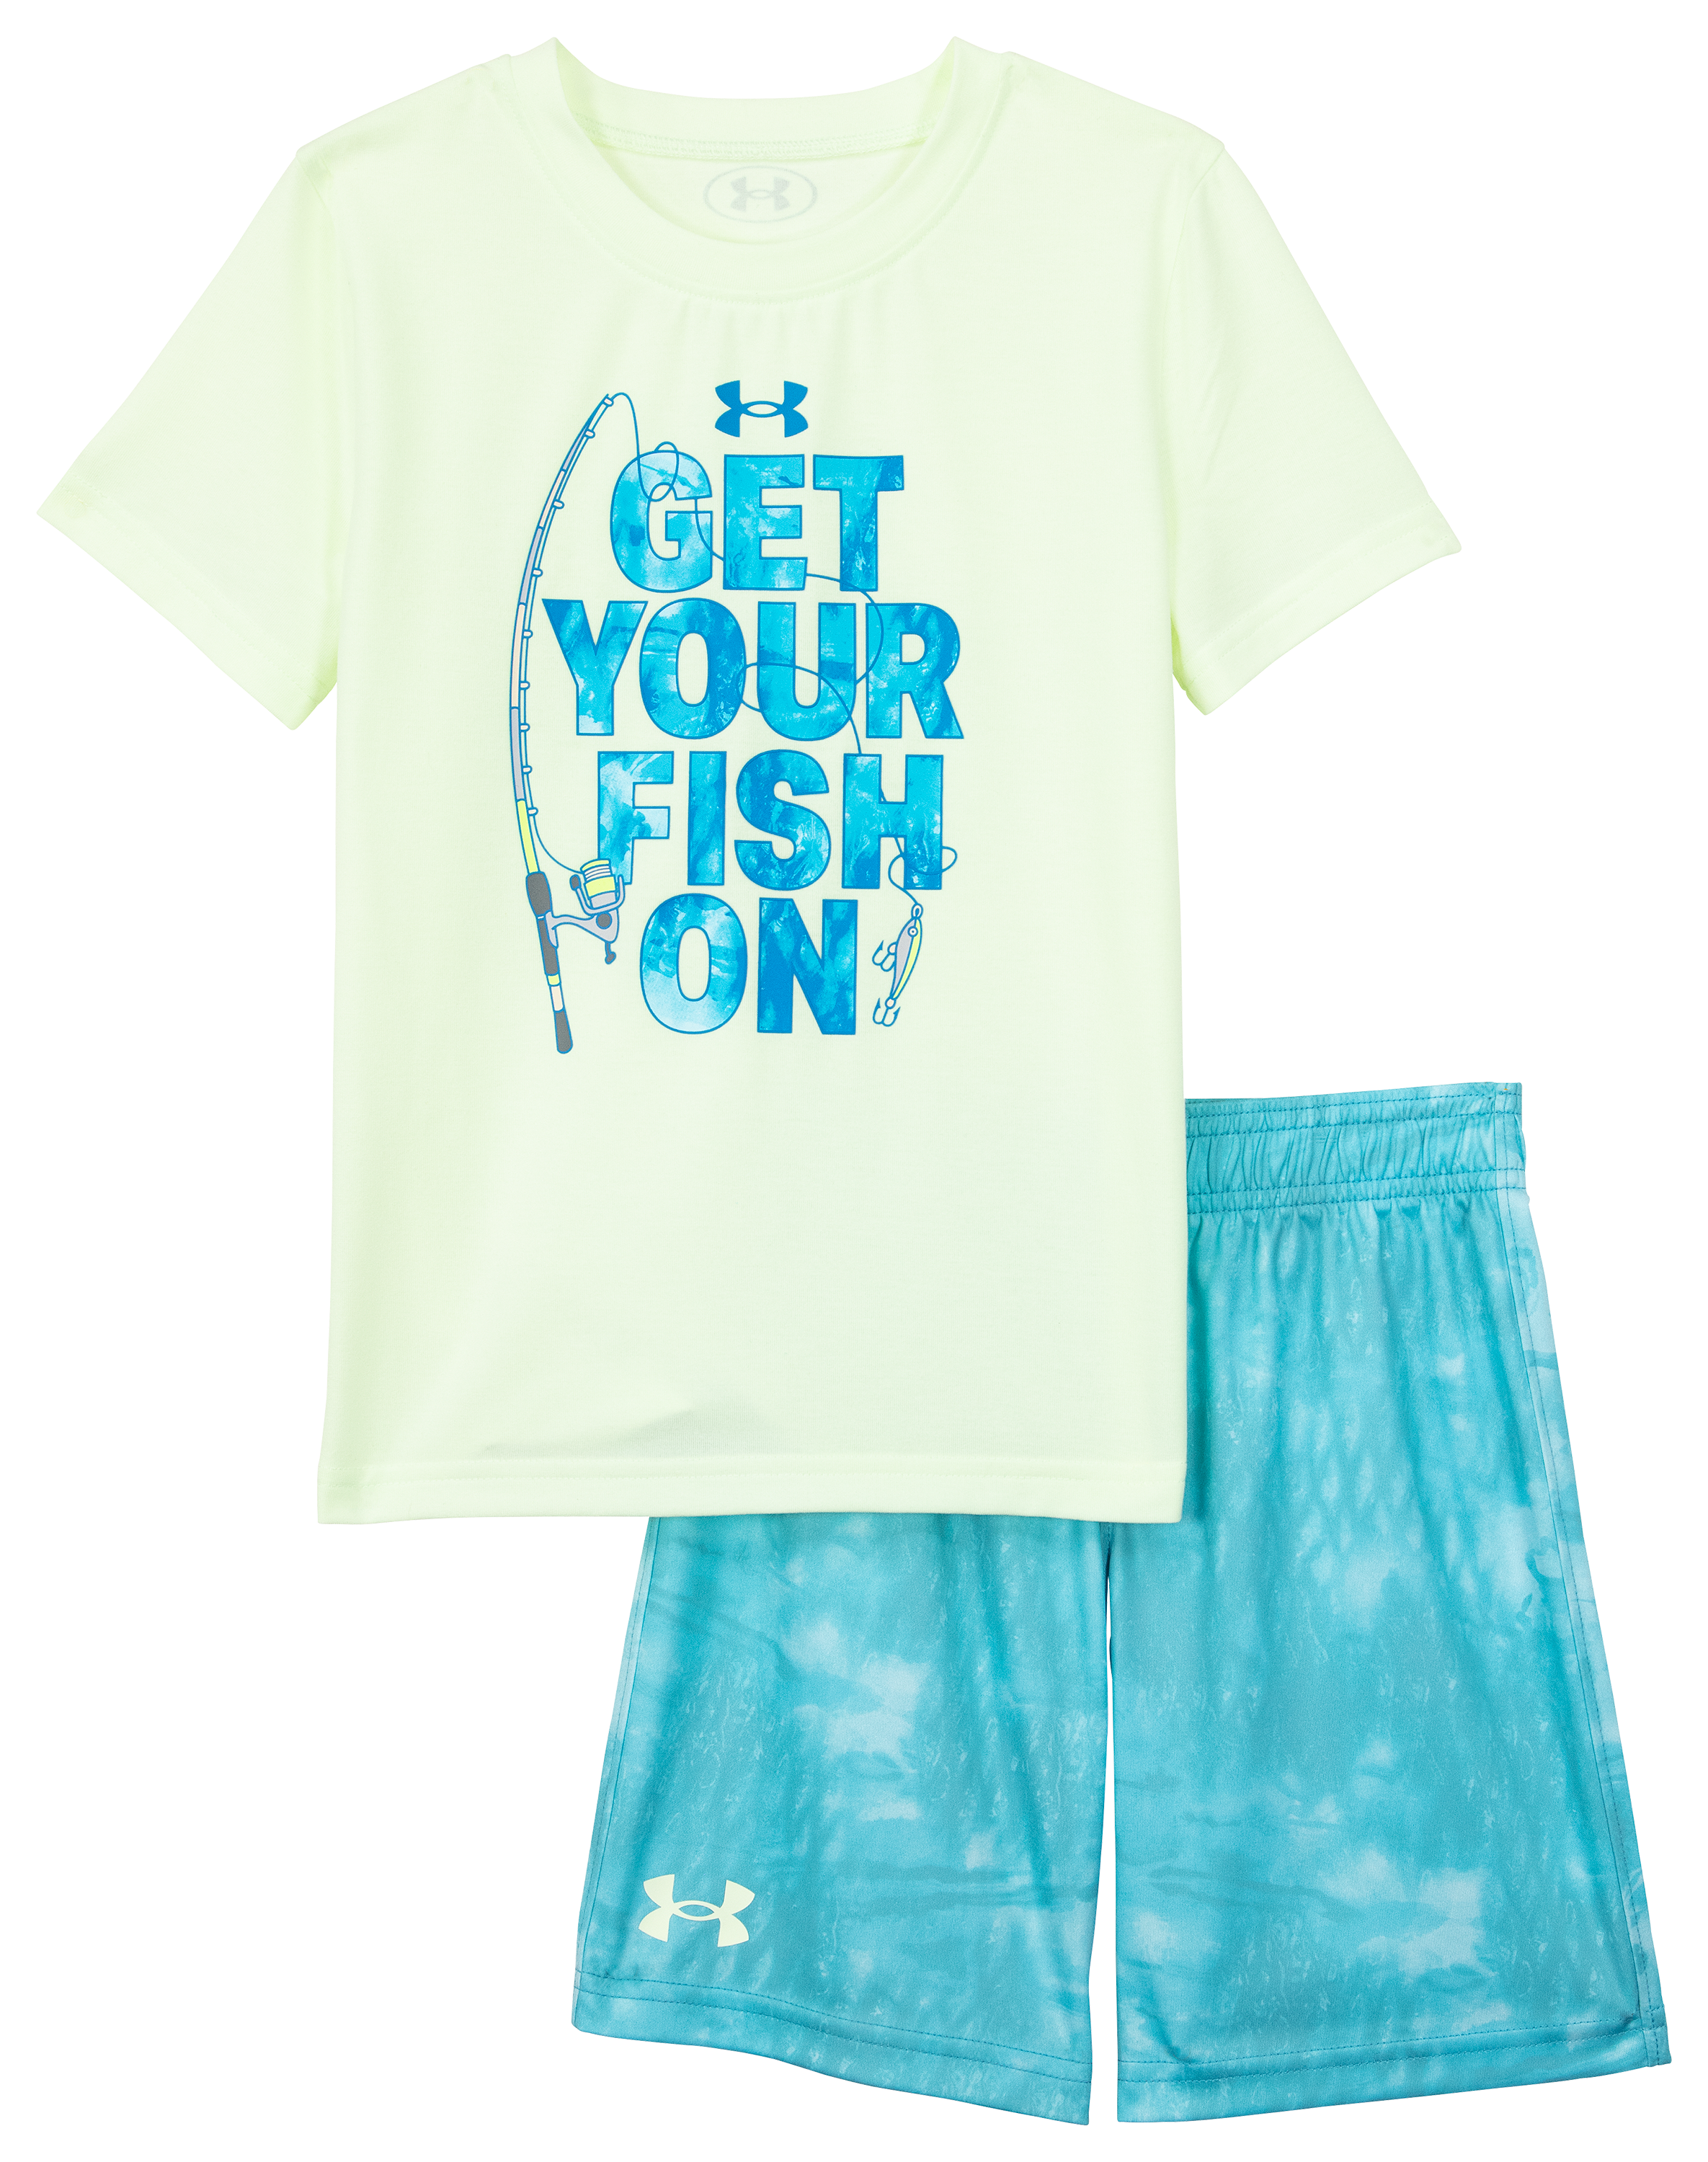 Under Armour Get Your Fish On Short-Sleeve Bodysuit and Shorts Set for Baby Boys - Sugar Mint - 0-3 Months